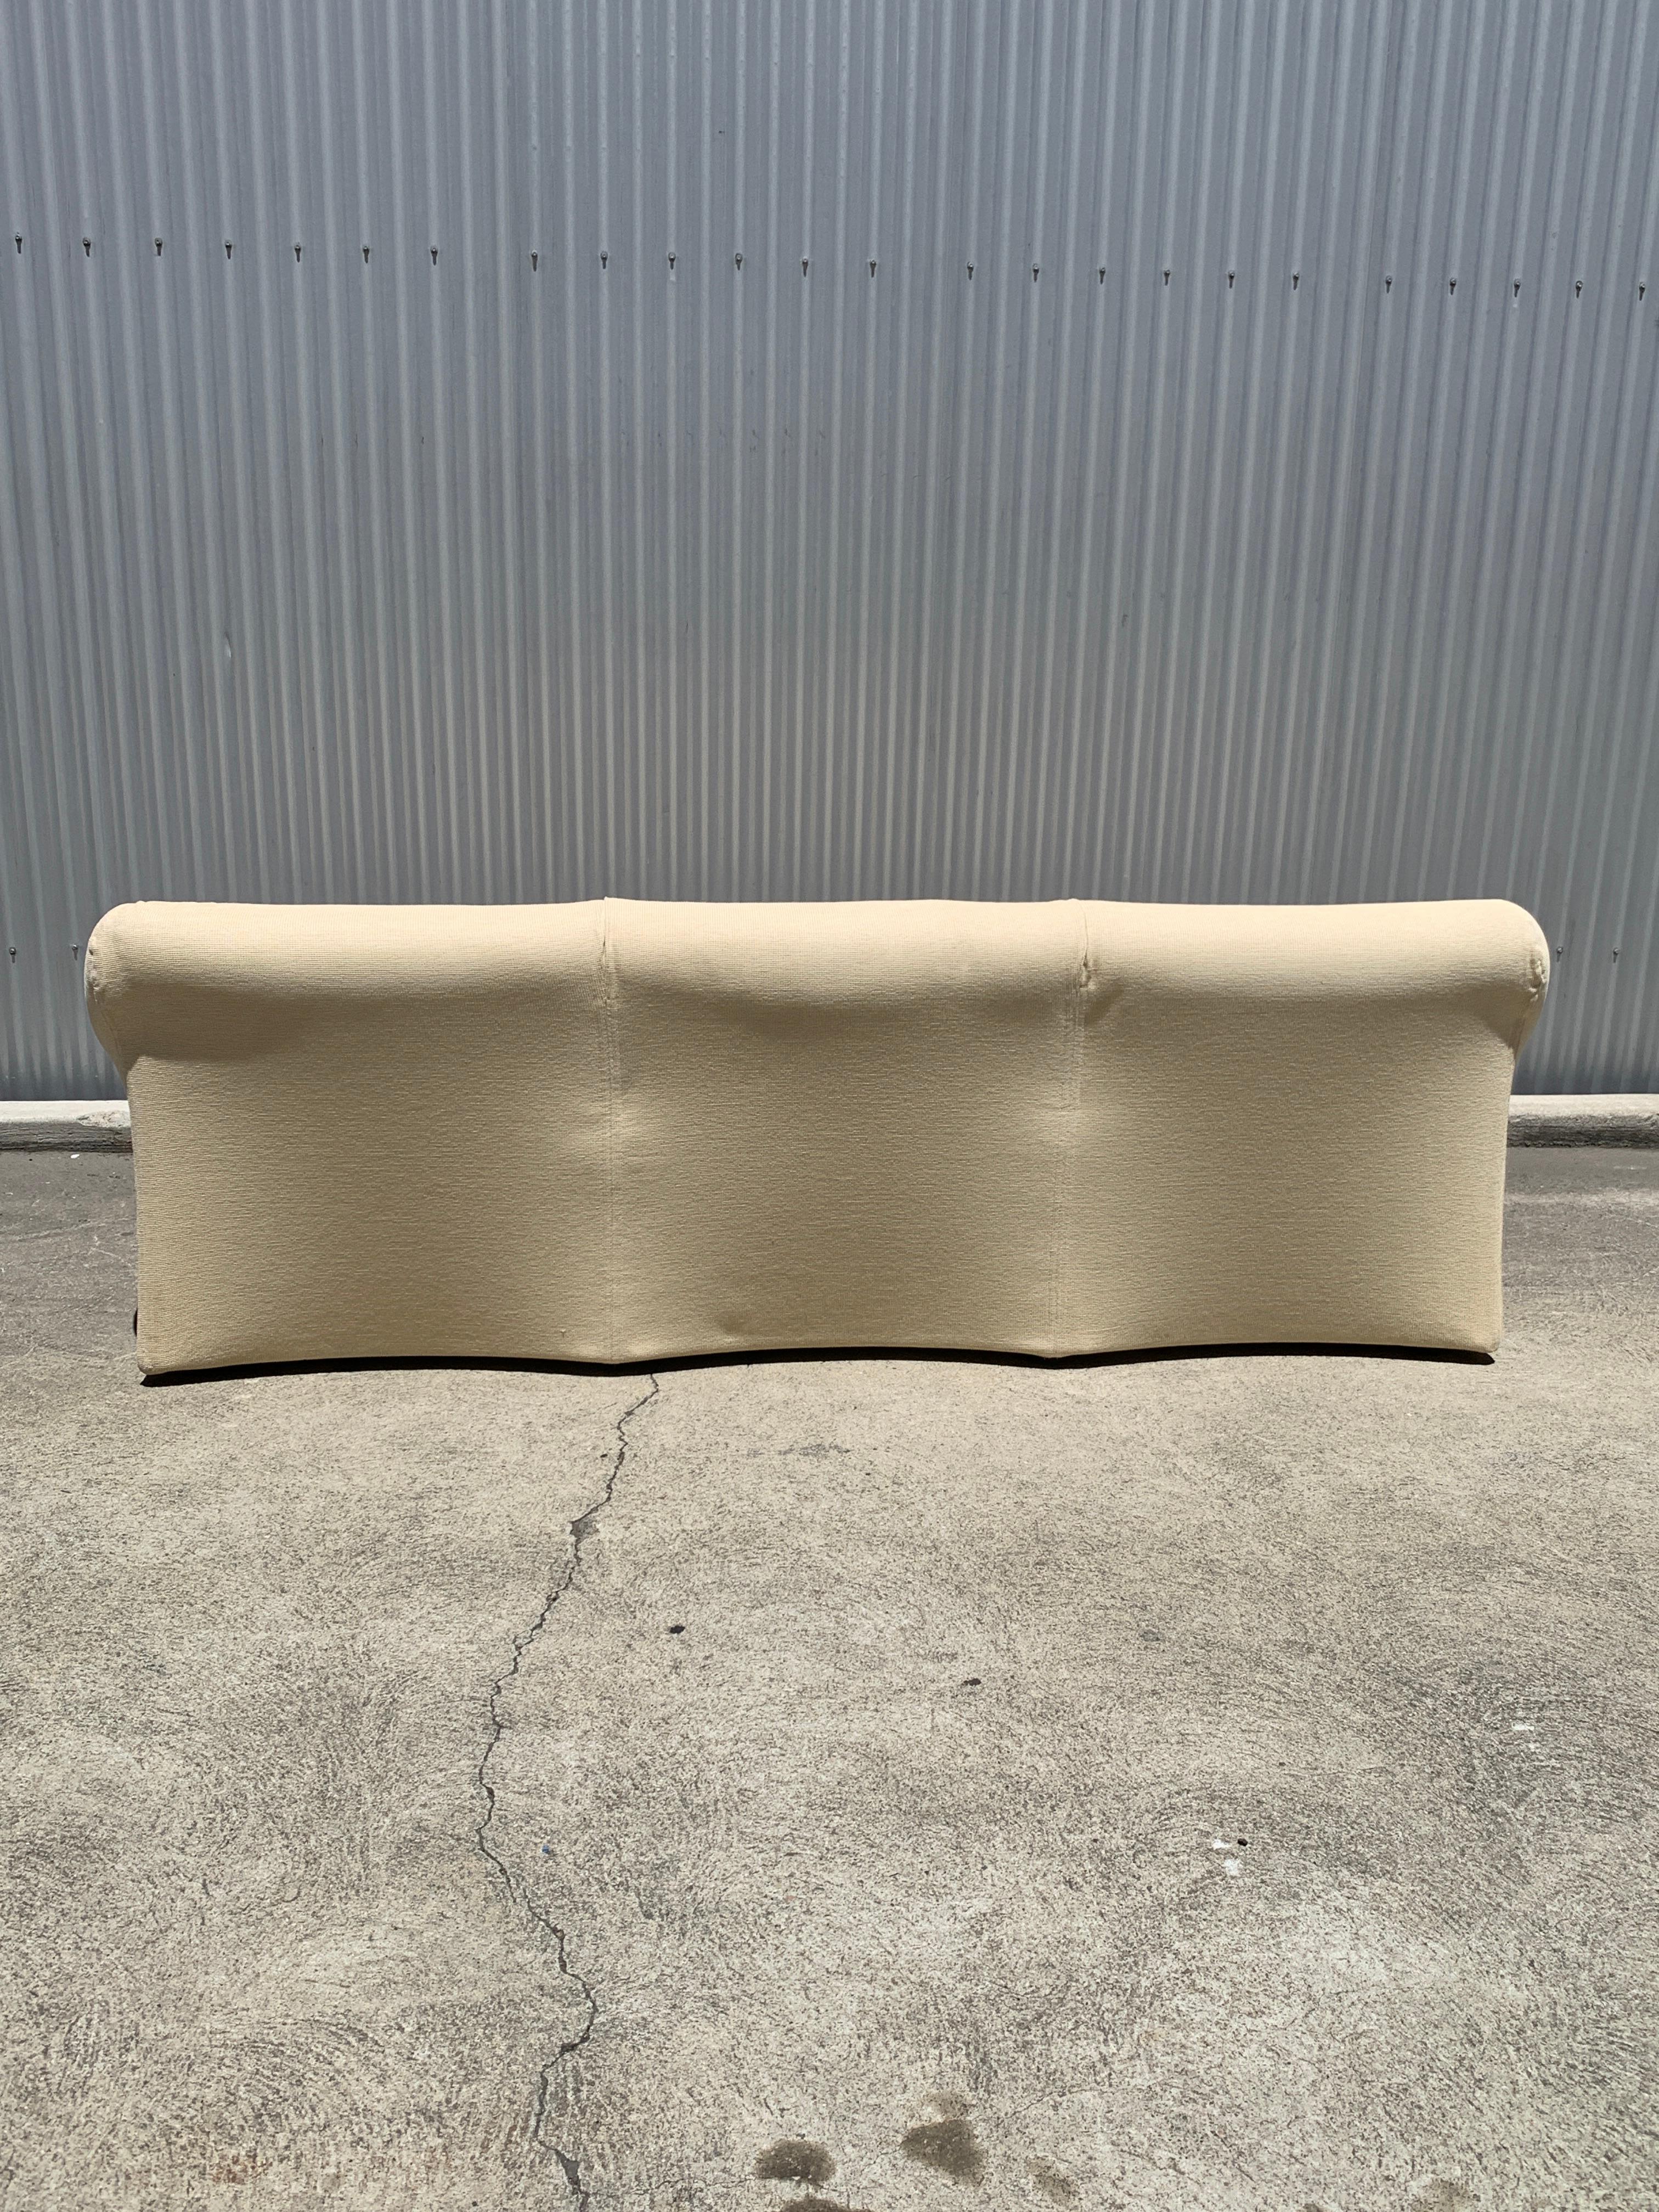 Beautiful sofa designed by Mario Bellini for Cassina manufacture in 1970s period, Italy.

Creme color boucle original upholstery, steel frame construction. 